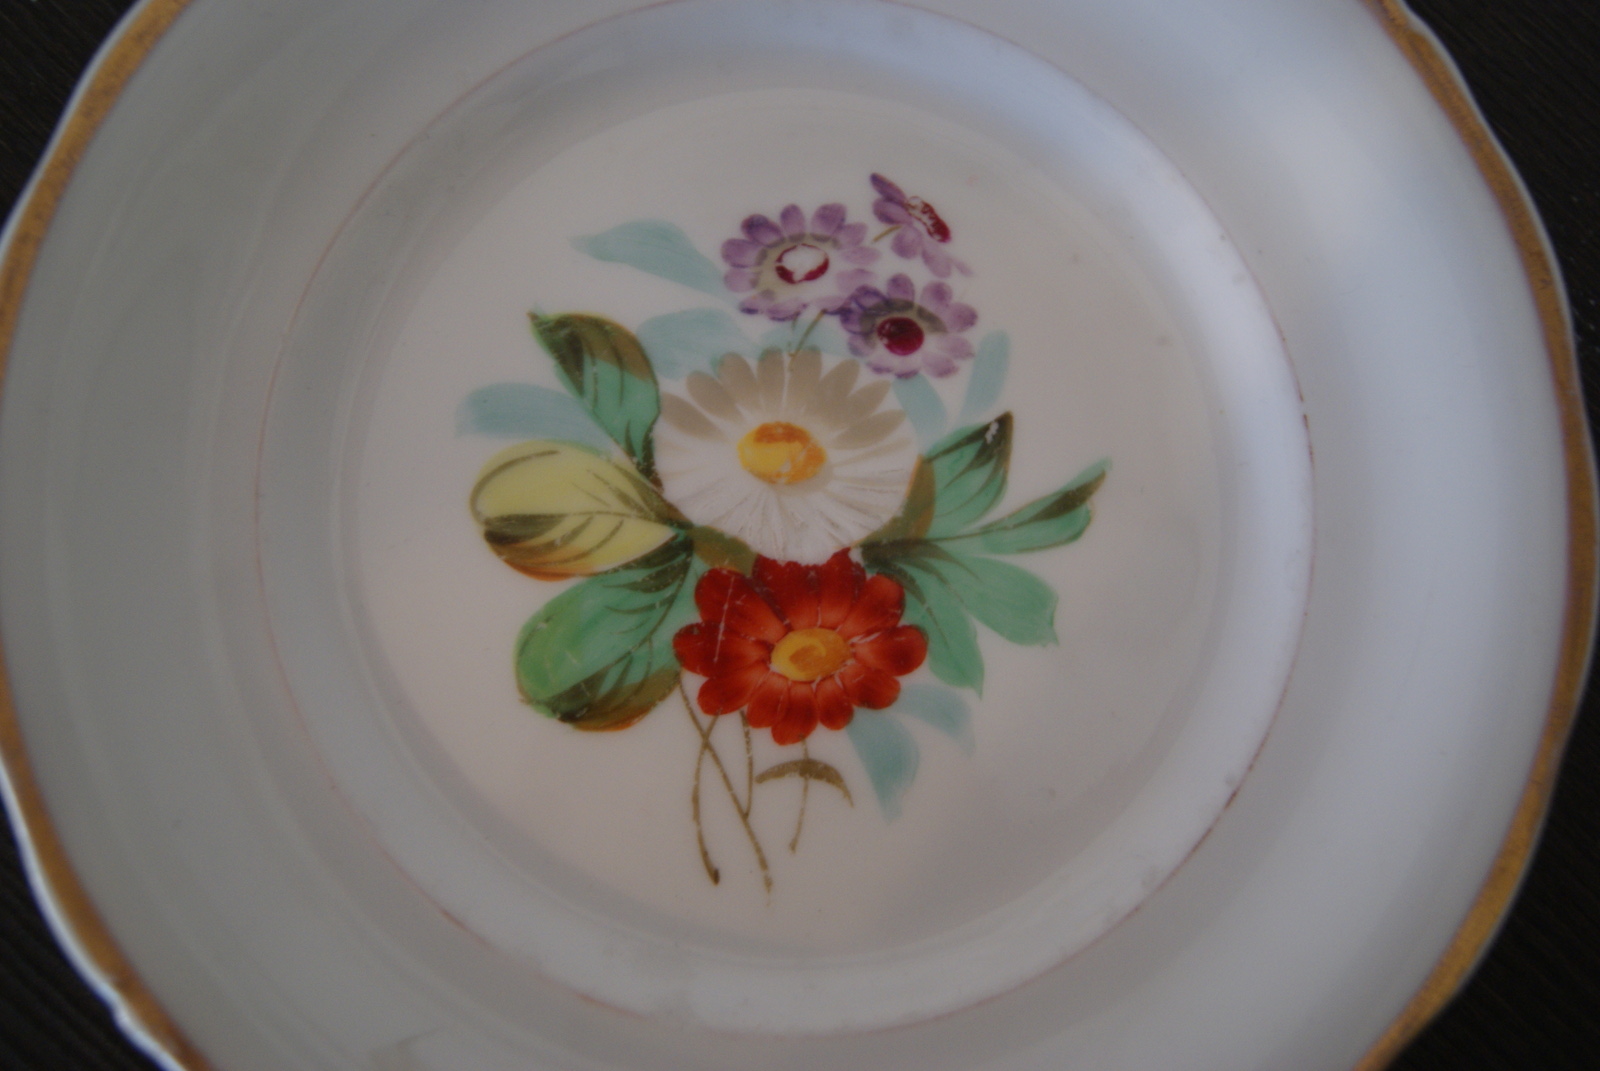 Waldenburg plate with bouquet, flowers and leaves